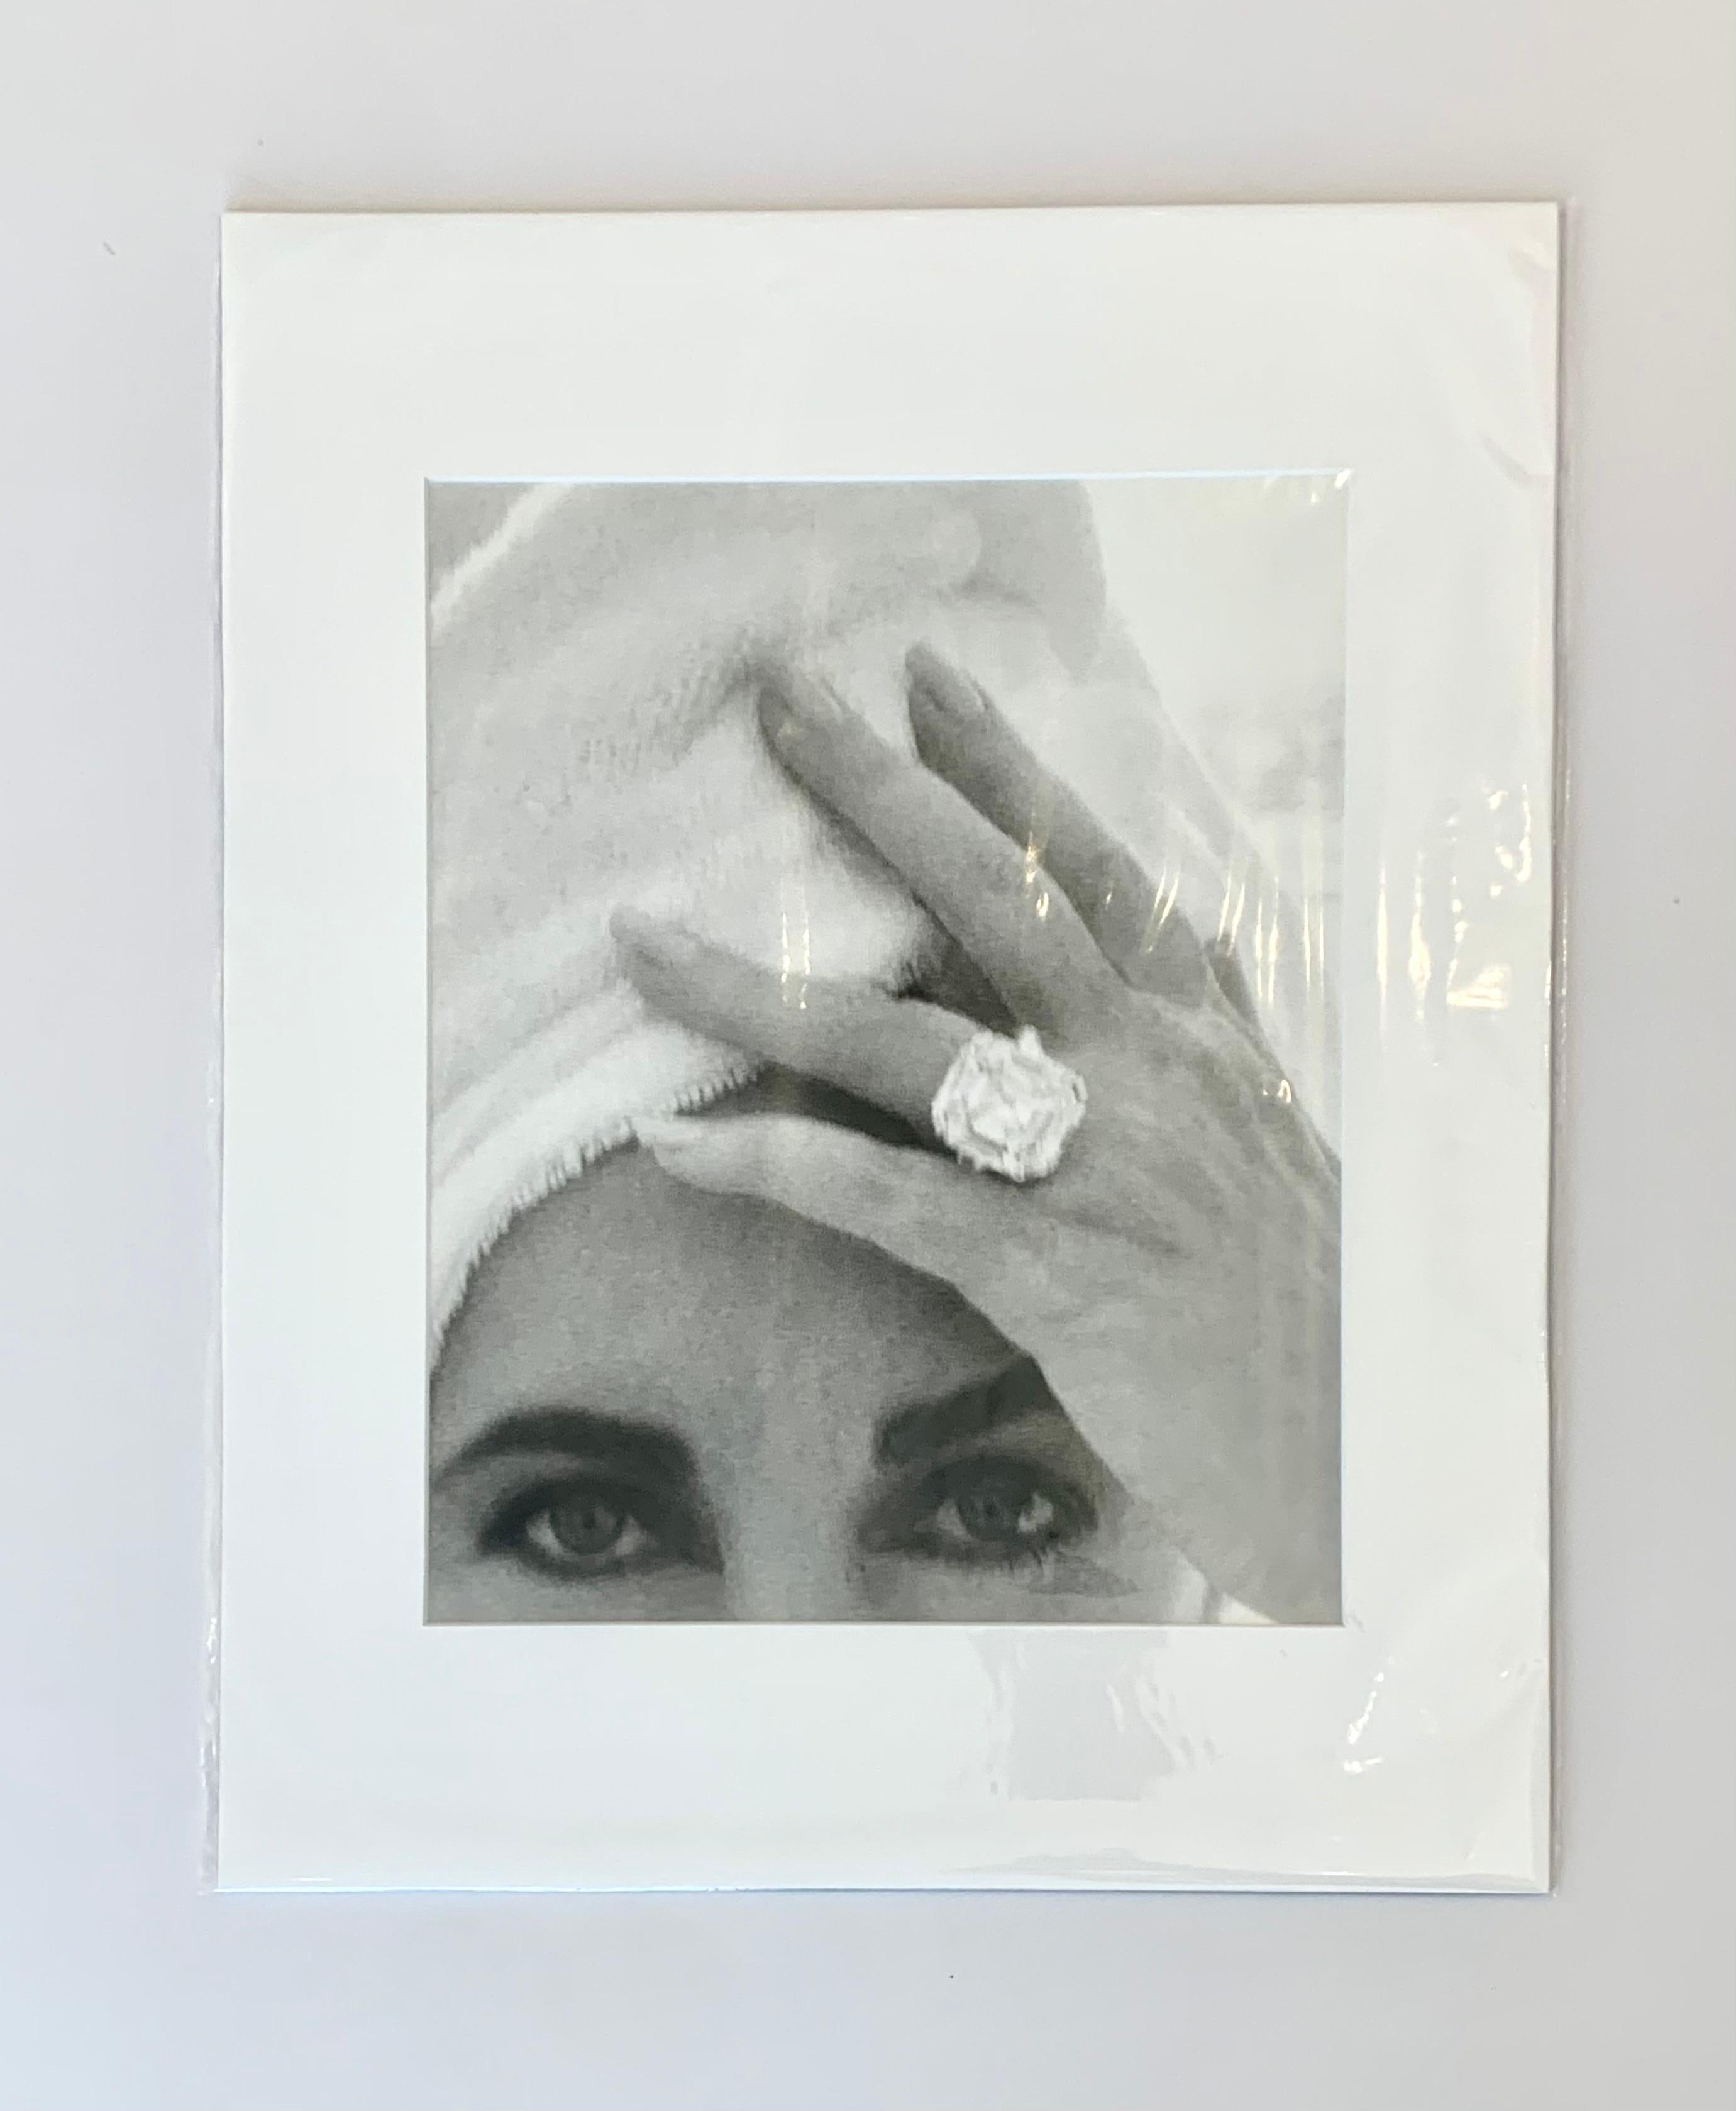 Elizabeth Taylor 1991
by Herb Ritts

American actress and icon, Elizabeth Taylor, poses with towel and diamond ring.

Unframed
Matted
Overall size : 16 x 20